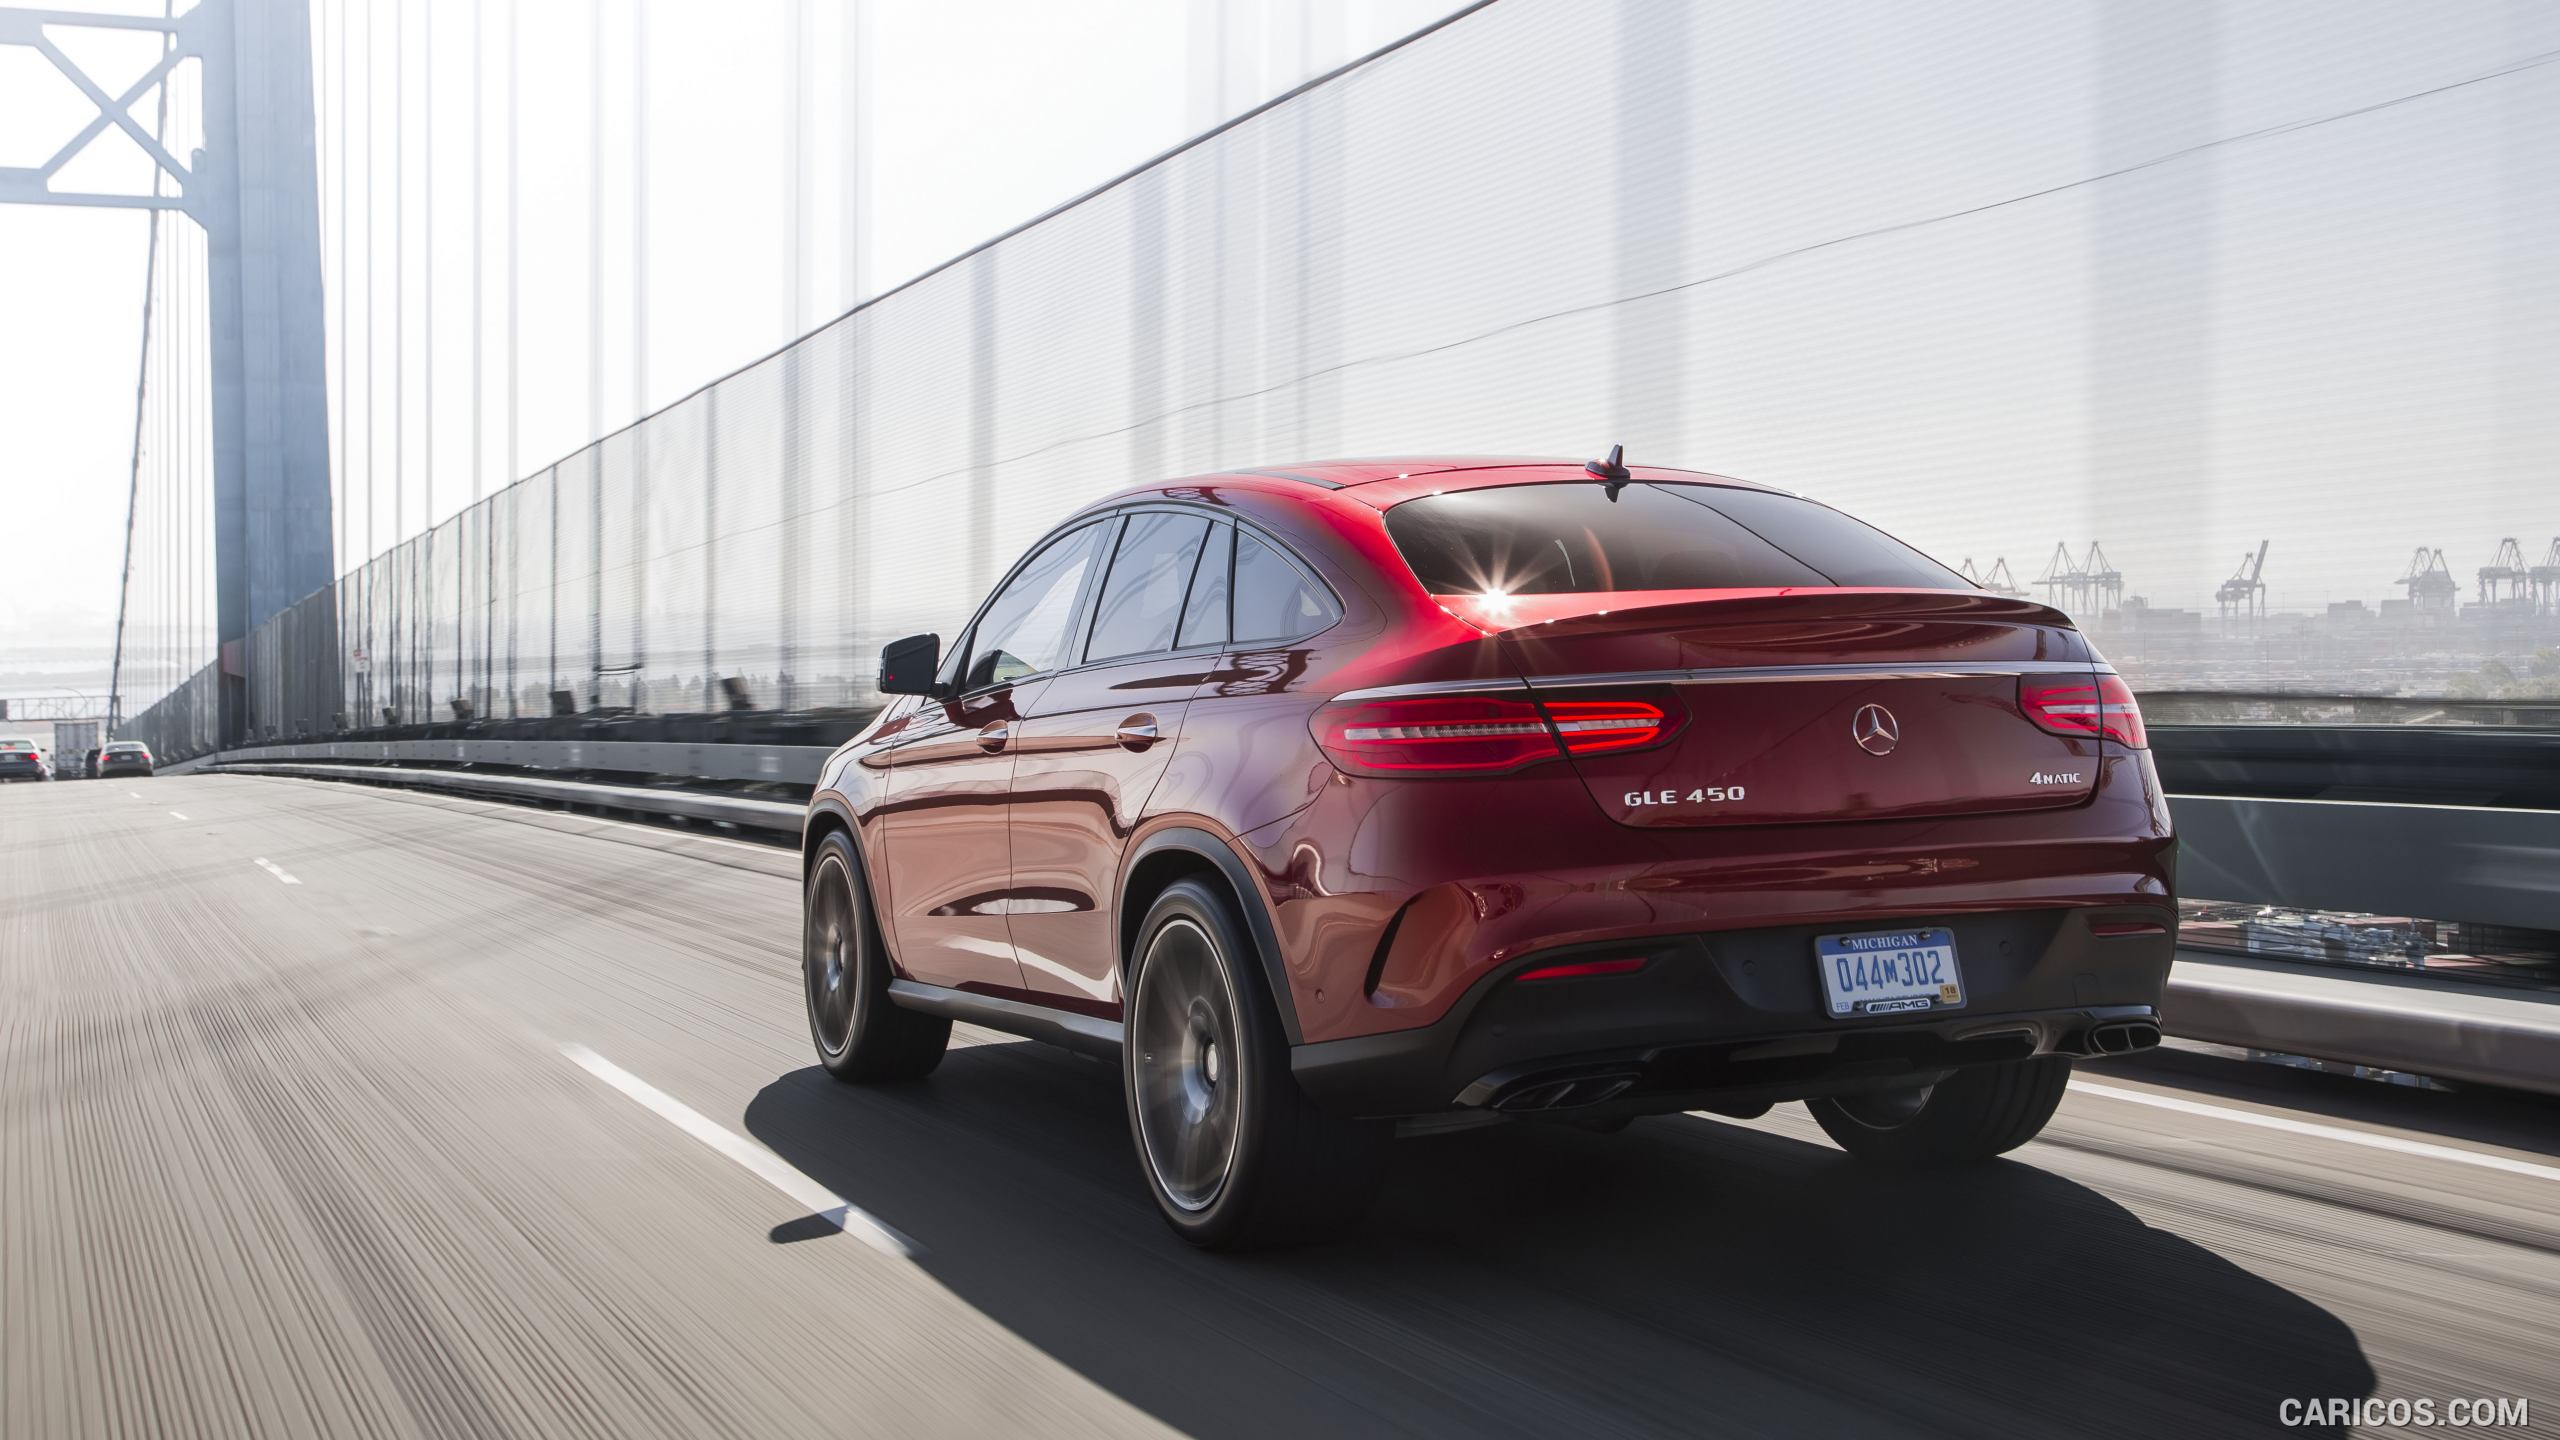 2016 Mercedes-Benz GLE 450 AMG Coupe 4MATIC (US-Spec) - Rear, #59 of 115